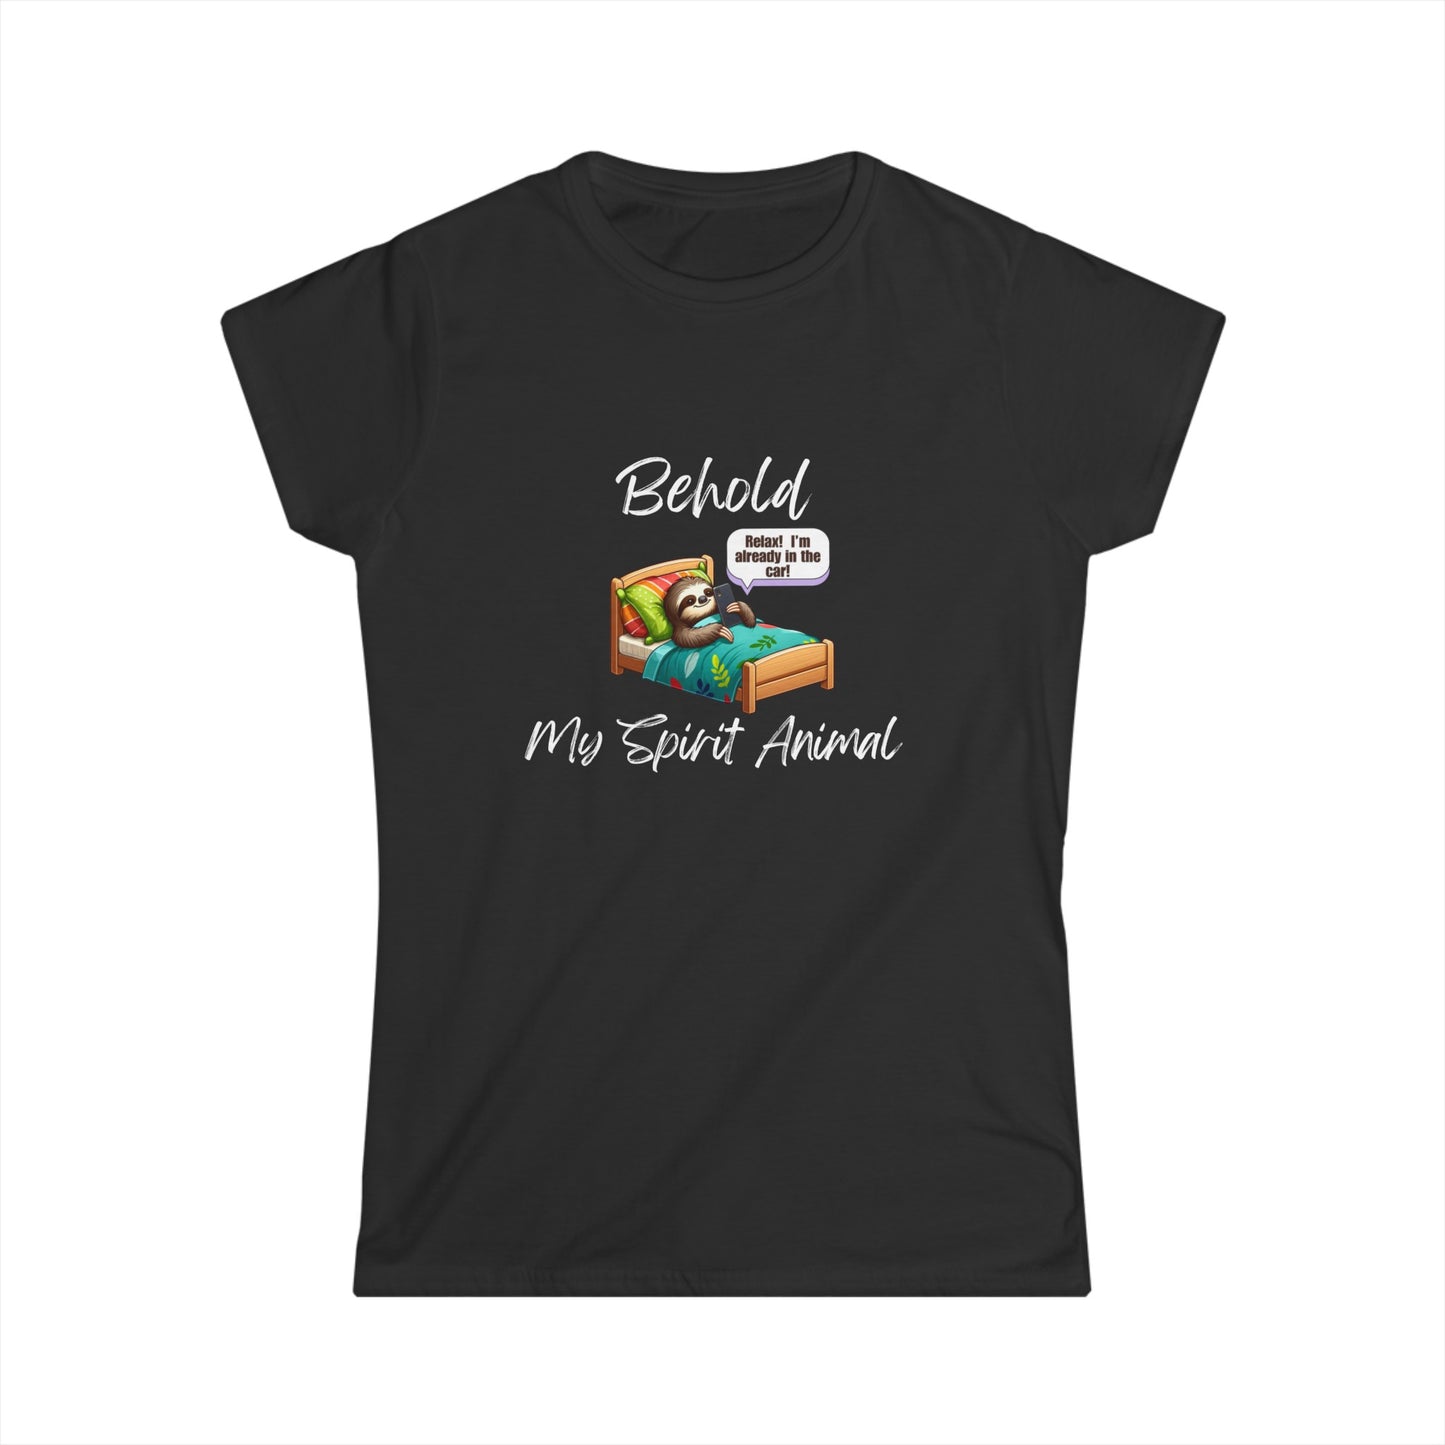 Funny Women's Soft Style Tee Sloth